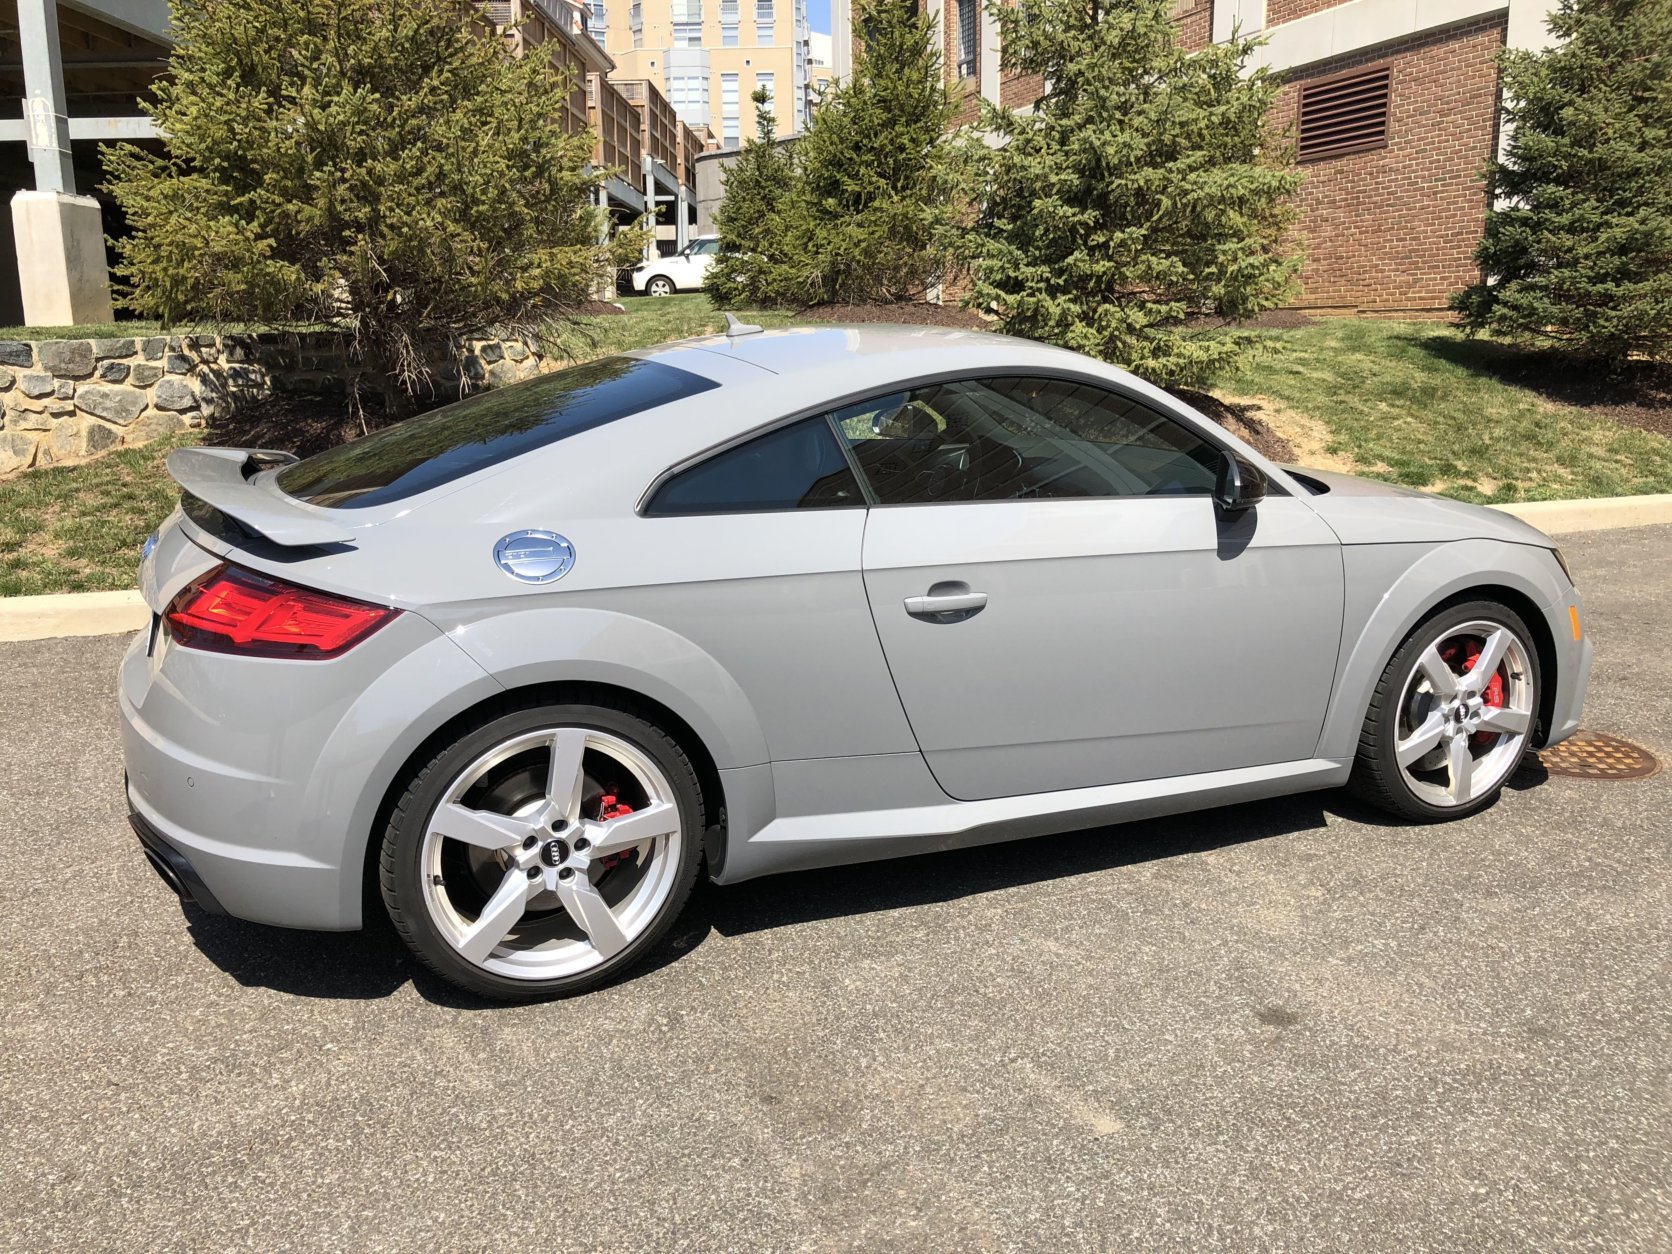 Large 19-inch wheels are standard for the Audi TT RS. You can also choose the 20-inch which tacks on $1,750 that also adds blacked-out mirrors and exterior trim.  (WTOP/Mike Parris)